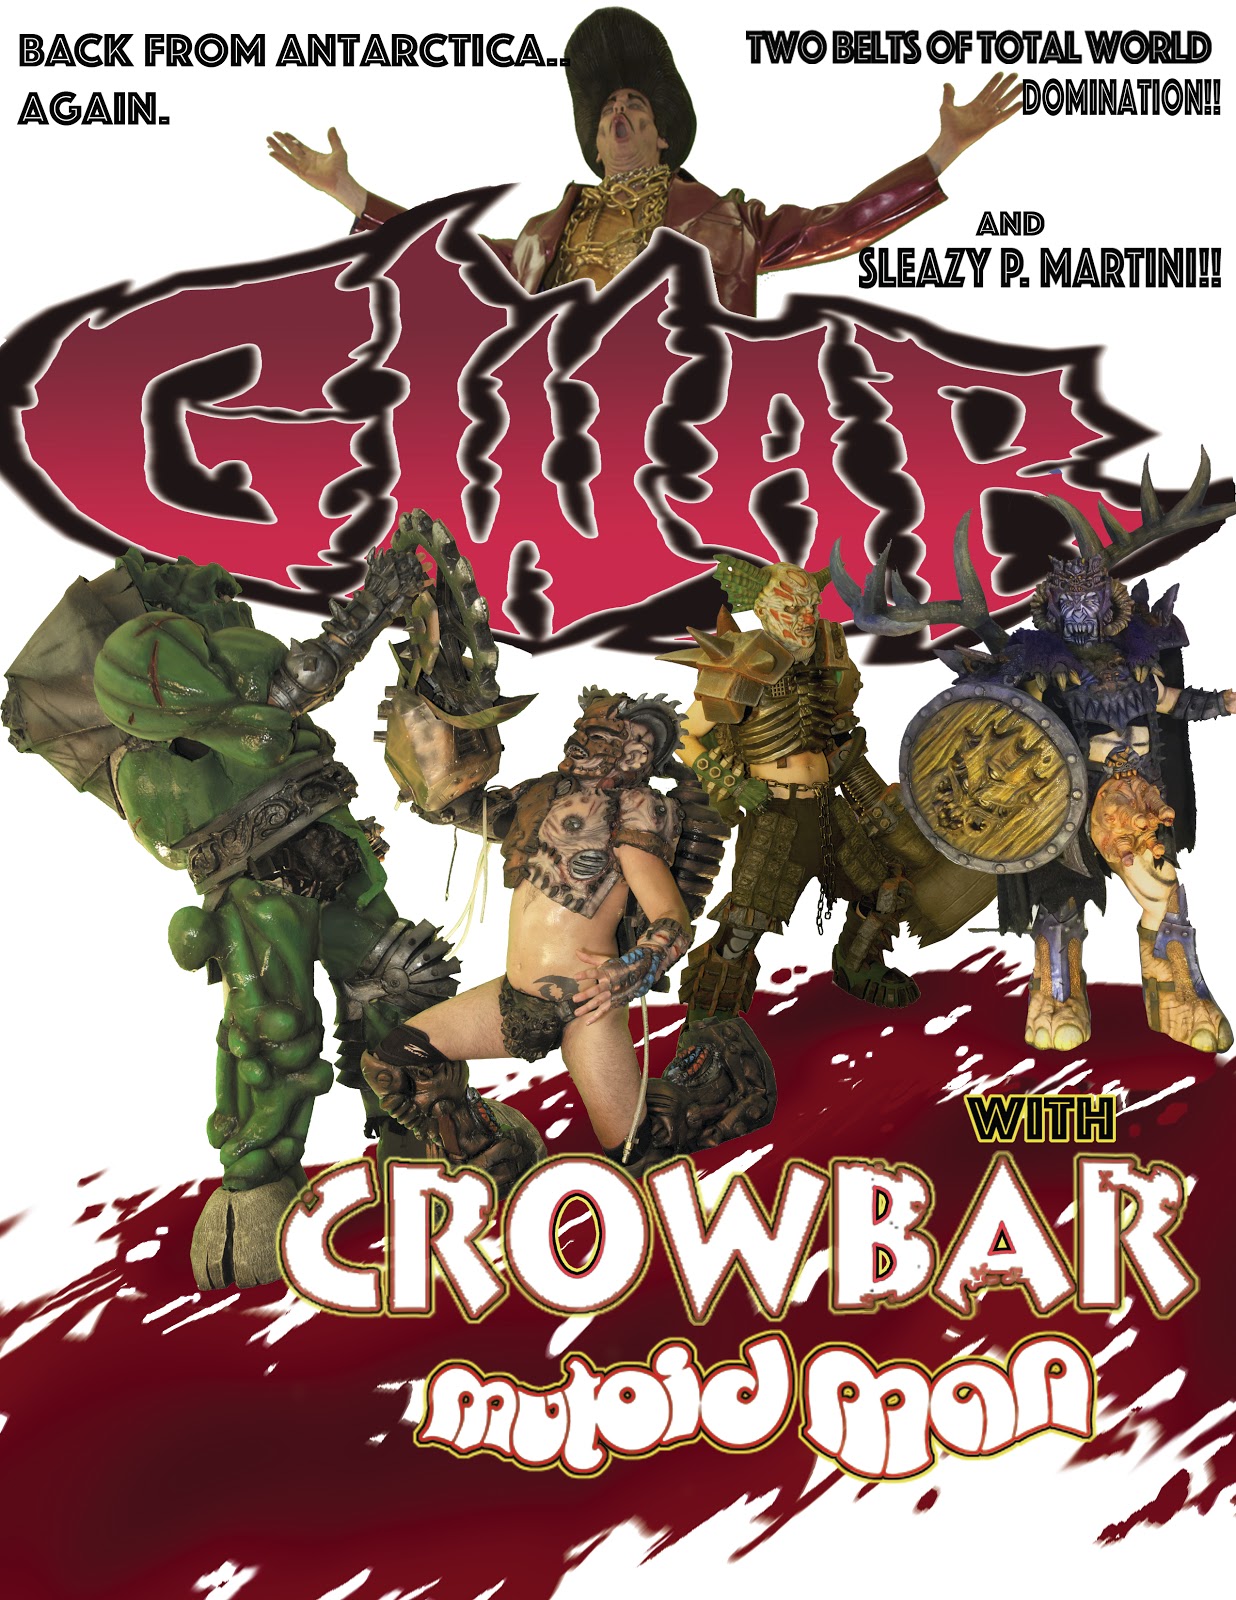 GWAR Announces September Tour Dates, Alongside Crowbar and Mutoid Man Appearances at The Gathering of the Juggalos and Riot Fest Chicago On Deck!